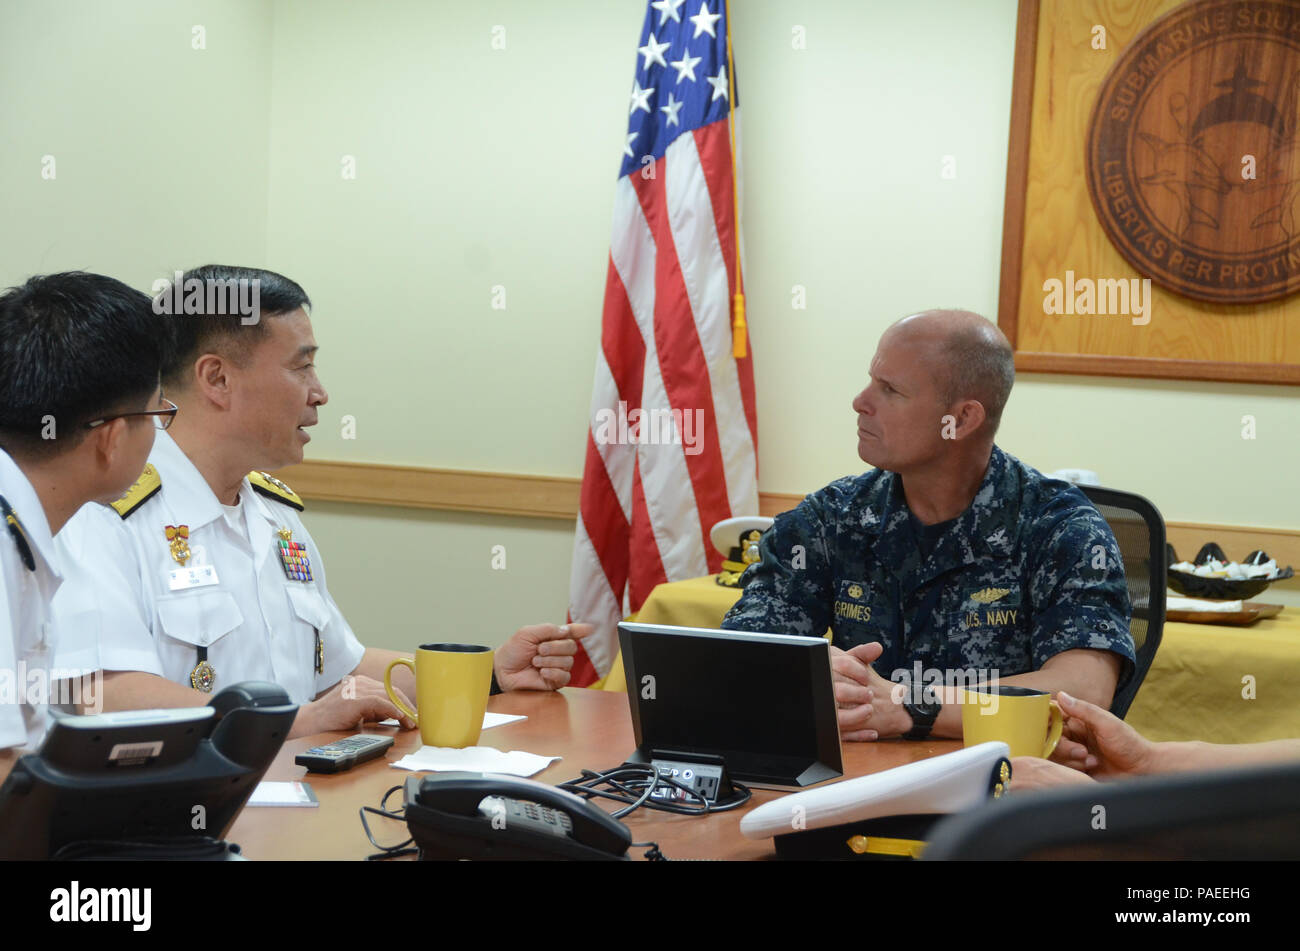 160328-N-YM720-006 SANTA RITA, Guam (March 31, 2016) Rear Adm. Youn Jeong Sang, commander, Submarine Force (CSF), Republic of Korea Navy (ROKN), meets with Capt. Jeffrey Grimes, commander, Submarine Squadron 15, during an office call prior to the 43rd Submarine Warfare Committee Meeting (SWCM). SWCM is a bilateral discussion between the U.S. and ROKN submarine forces designed to foster the partnership and focuses on submarine tactics, force integraton and future submarine development. (U.S. Navy photo by MC3 Allen McNair/Released) Stock Photo